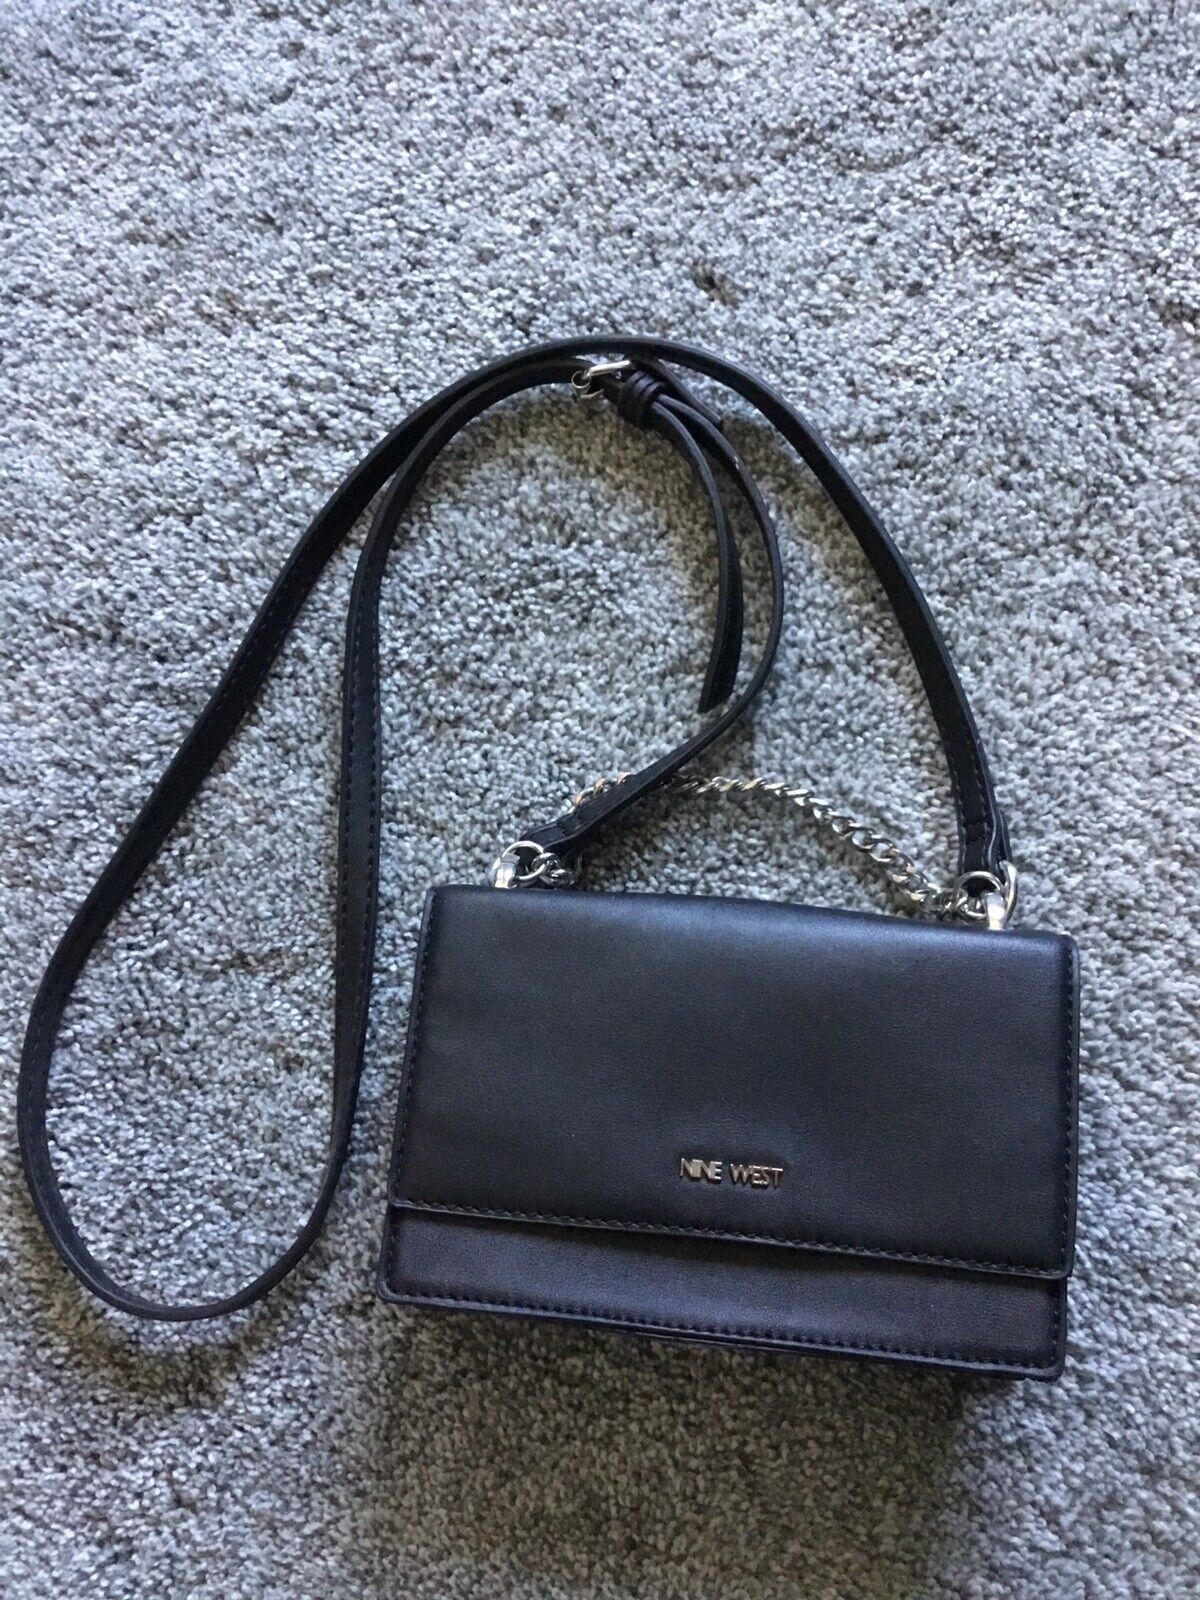 Nine West Small Black Handbag With Strap And Chain - Gem